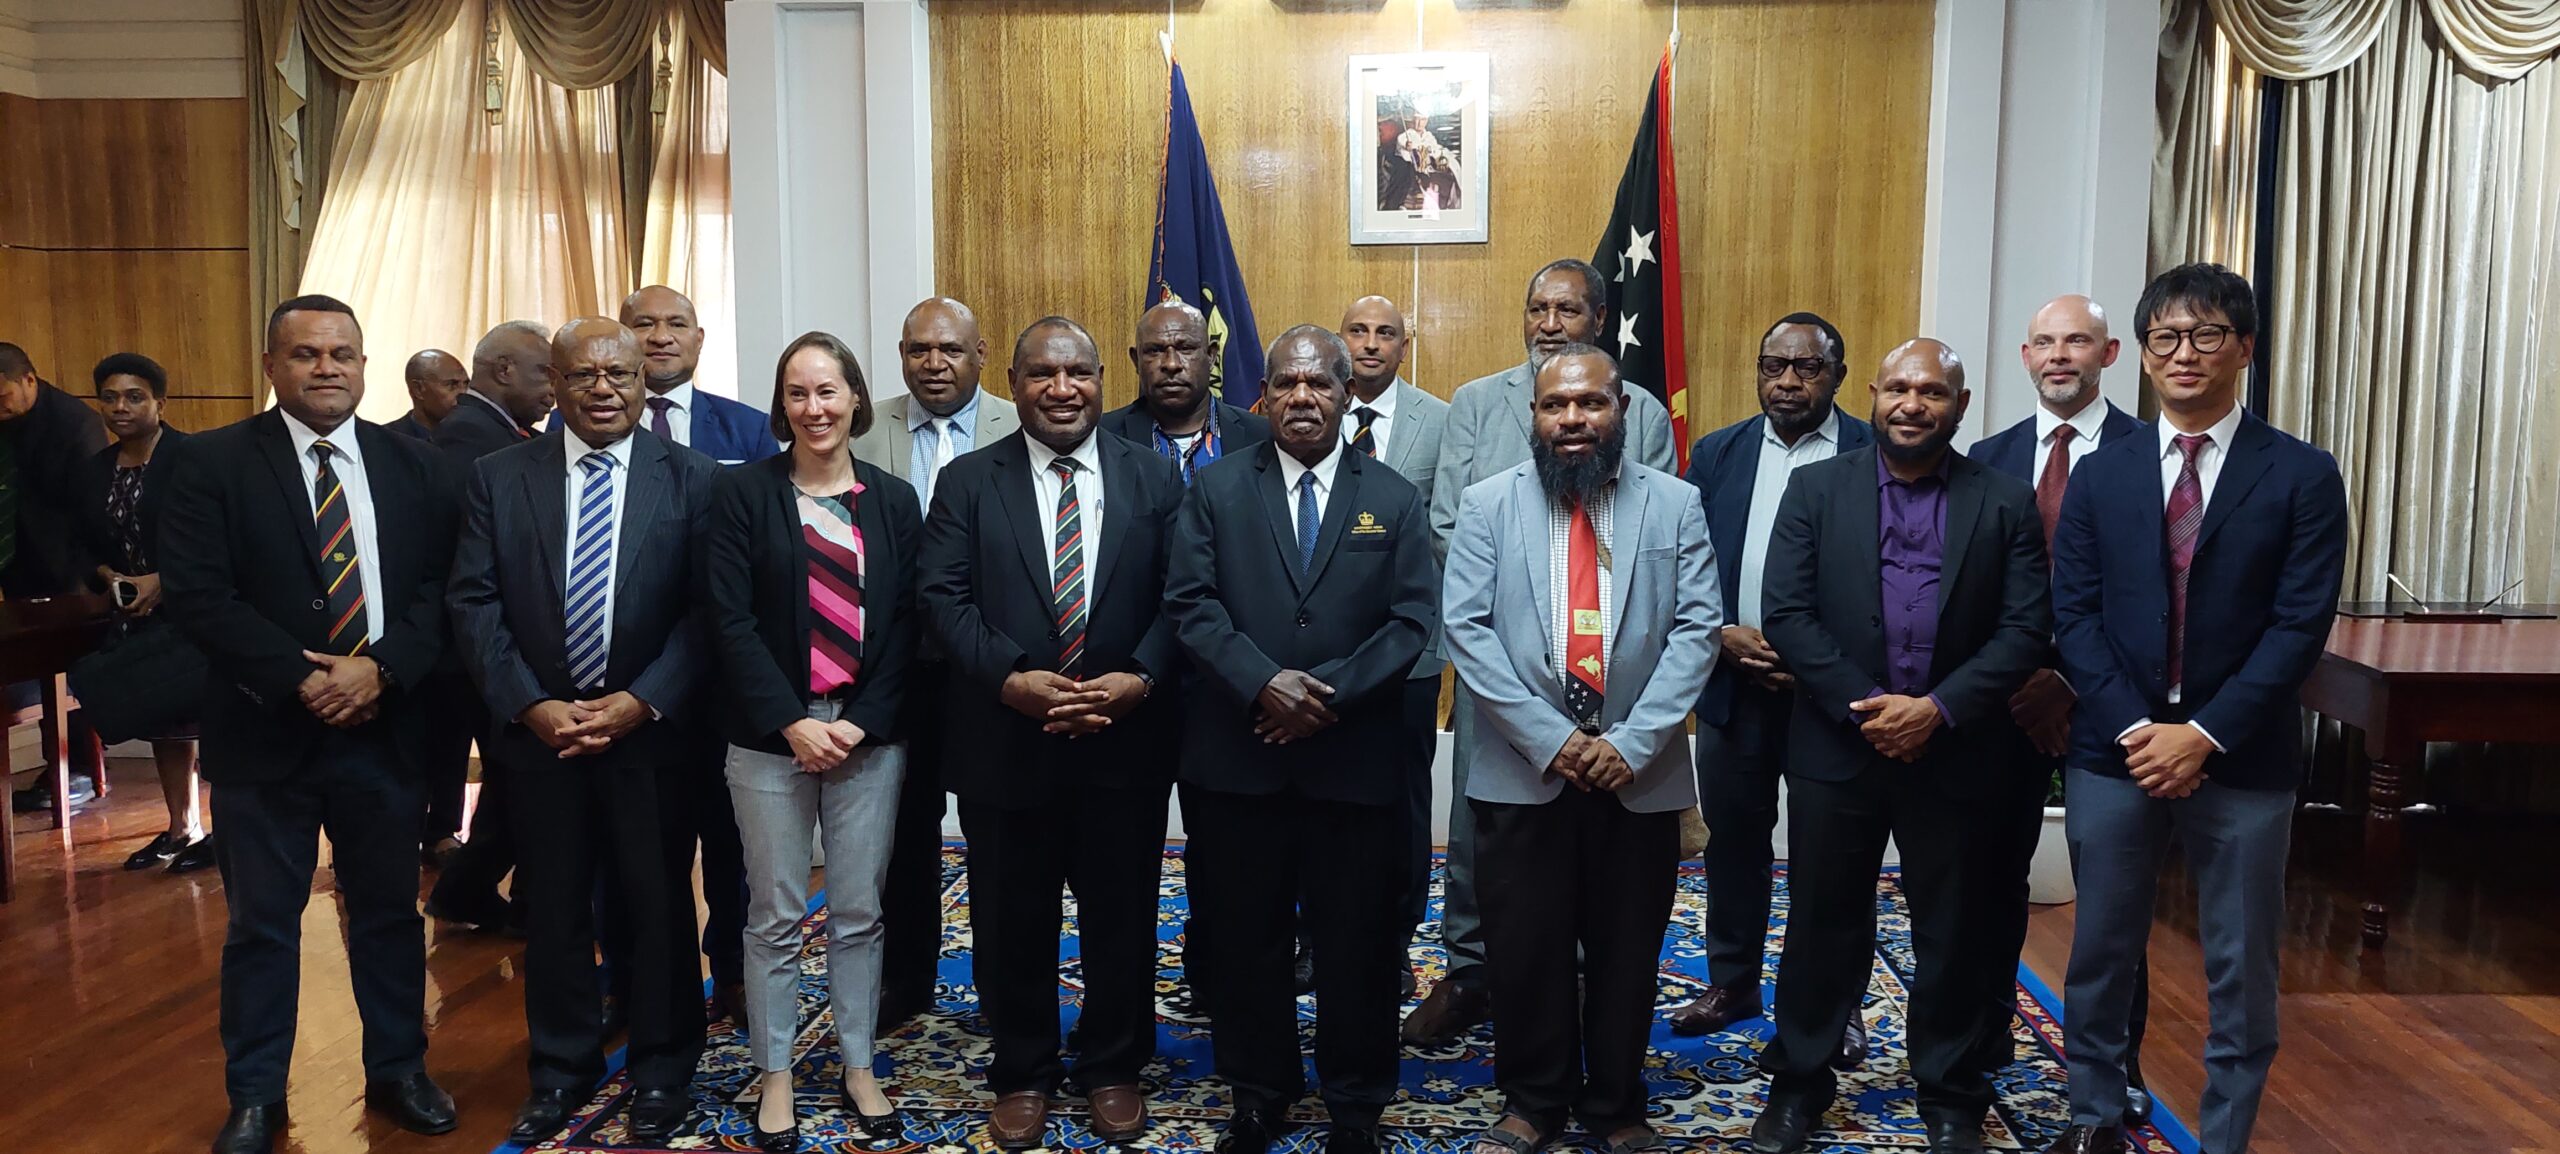 Prime Minister Marape Commends Exxon Mobil and Partners for Advancing P’nyang LNG Project